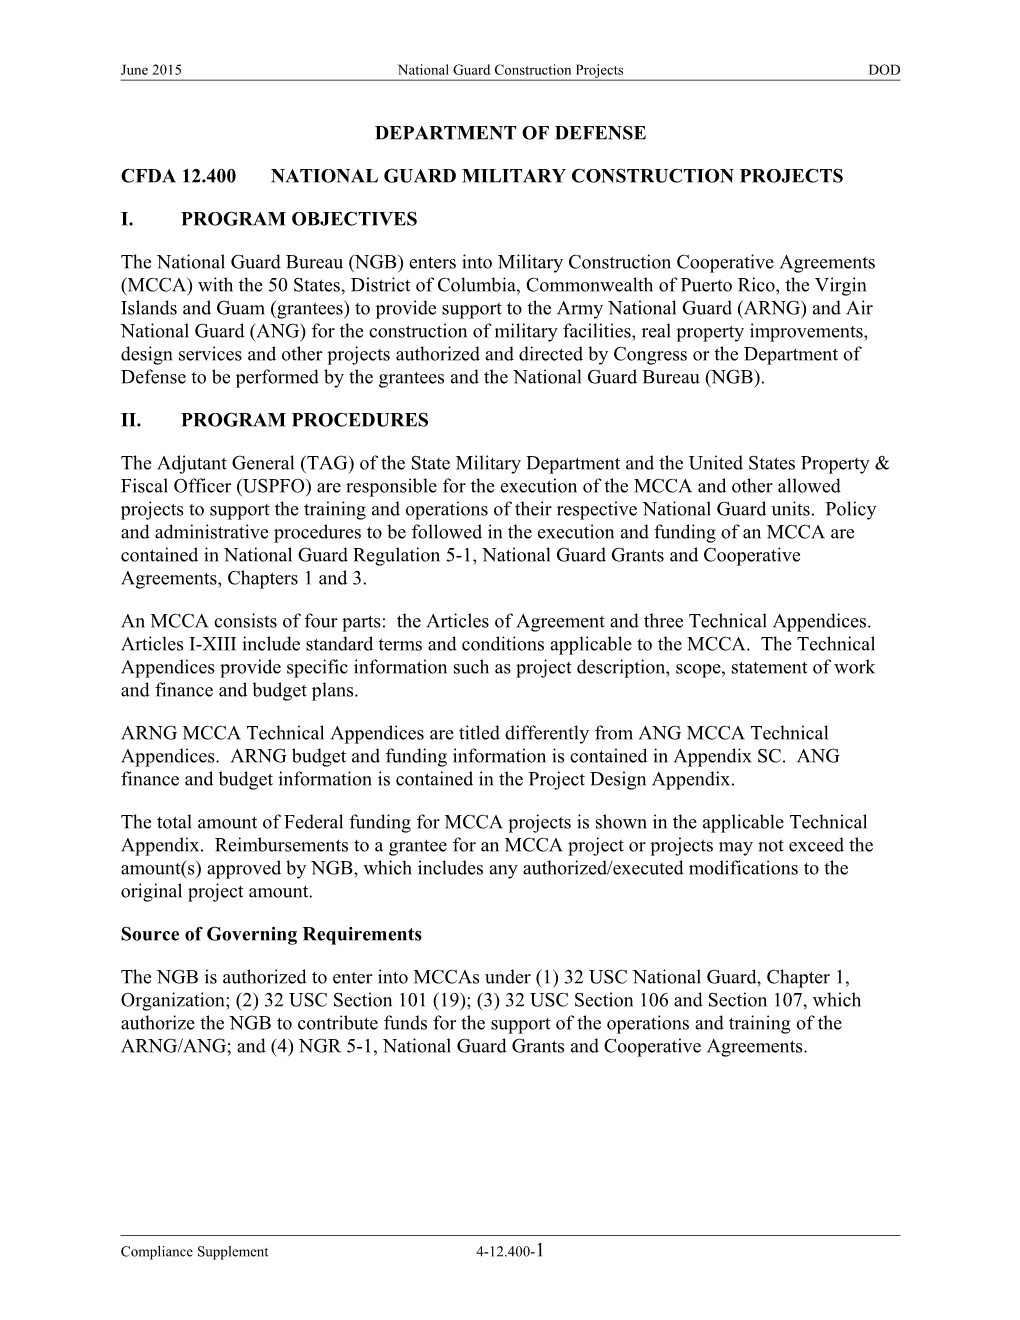 Cfda 12.400National Guard Military Construction Projects